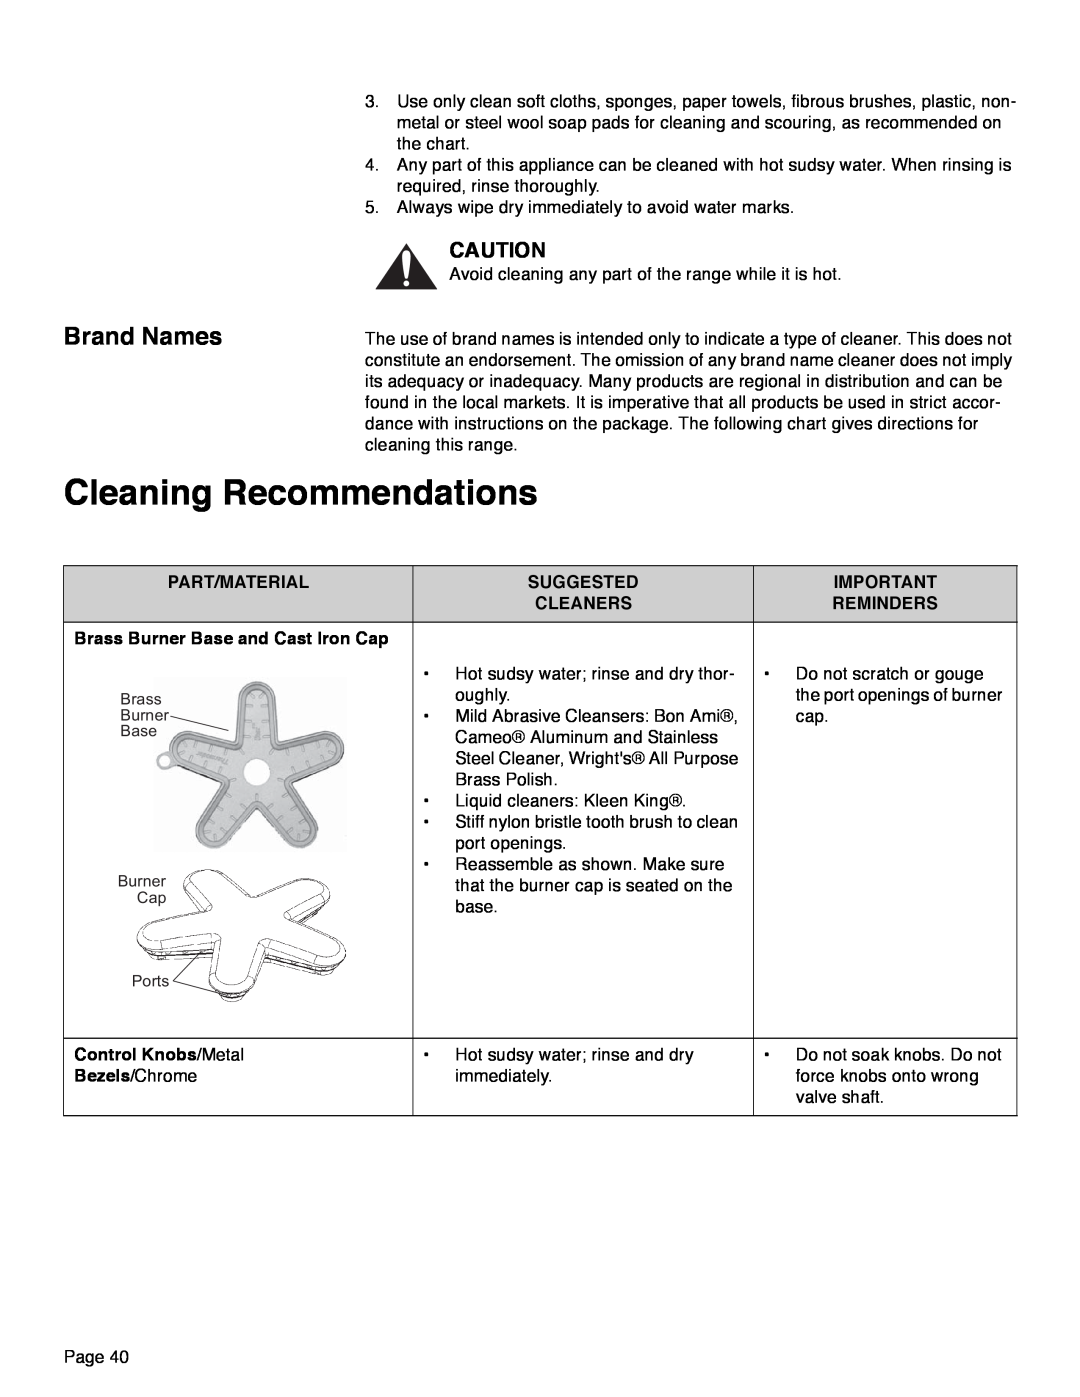 Thermador PRD36, PRD48, PRD30 manual Cleaning Recommendations, Brand Names 